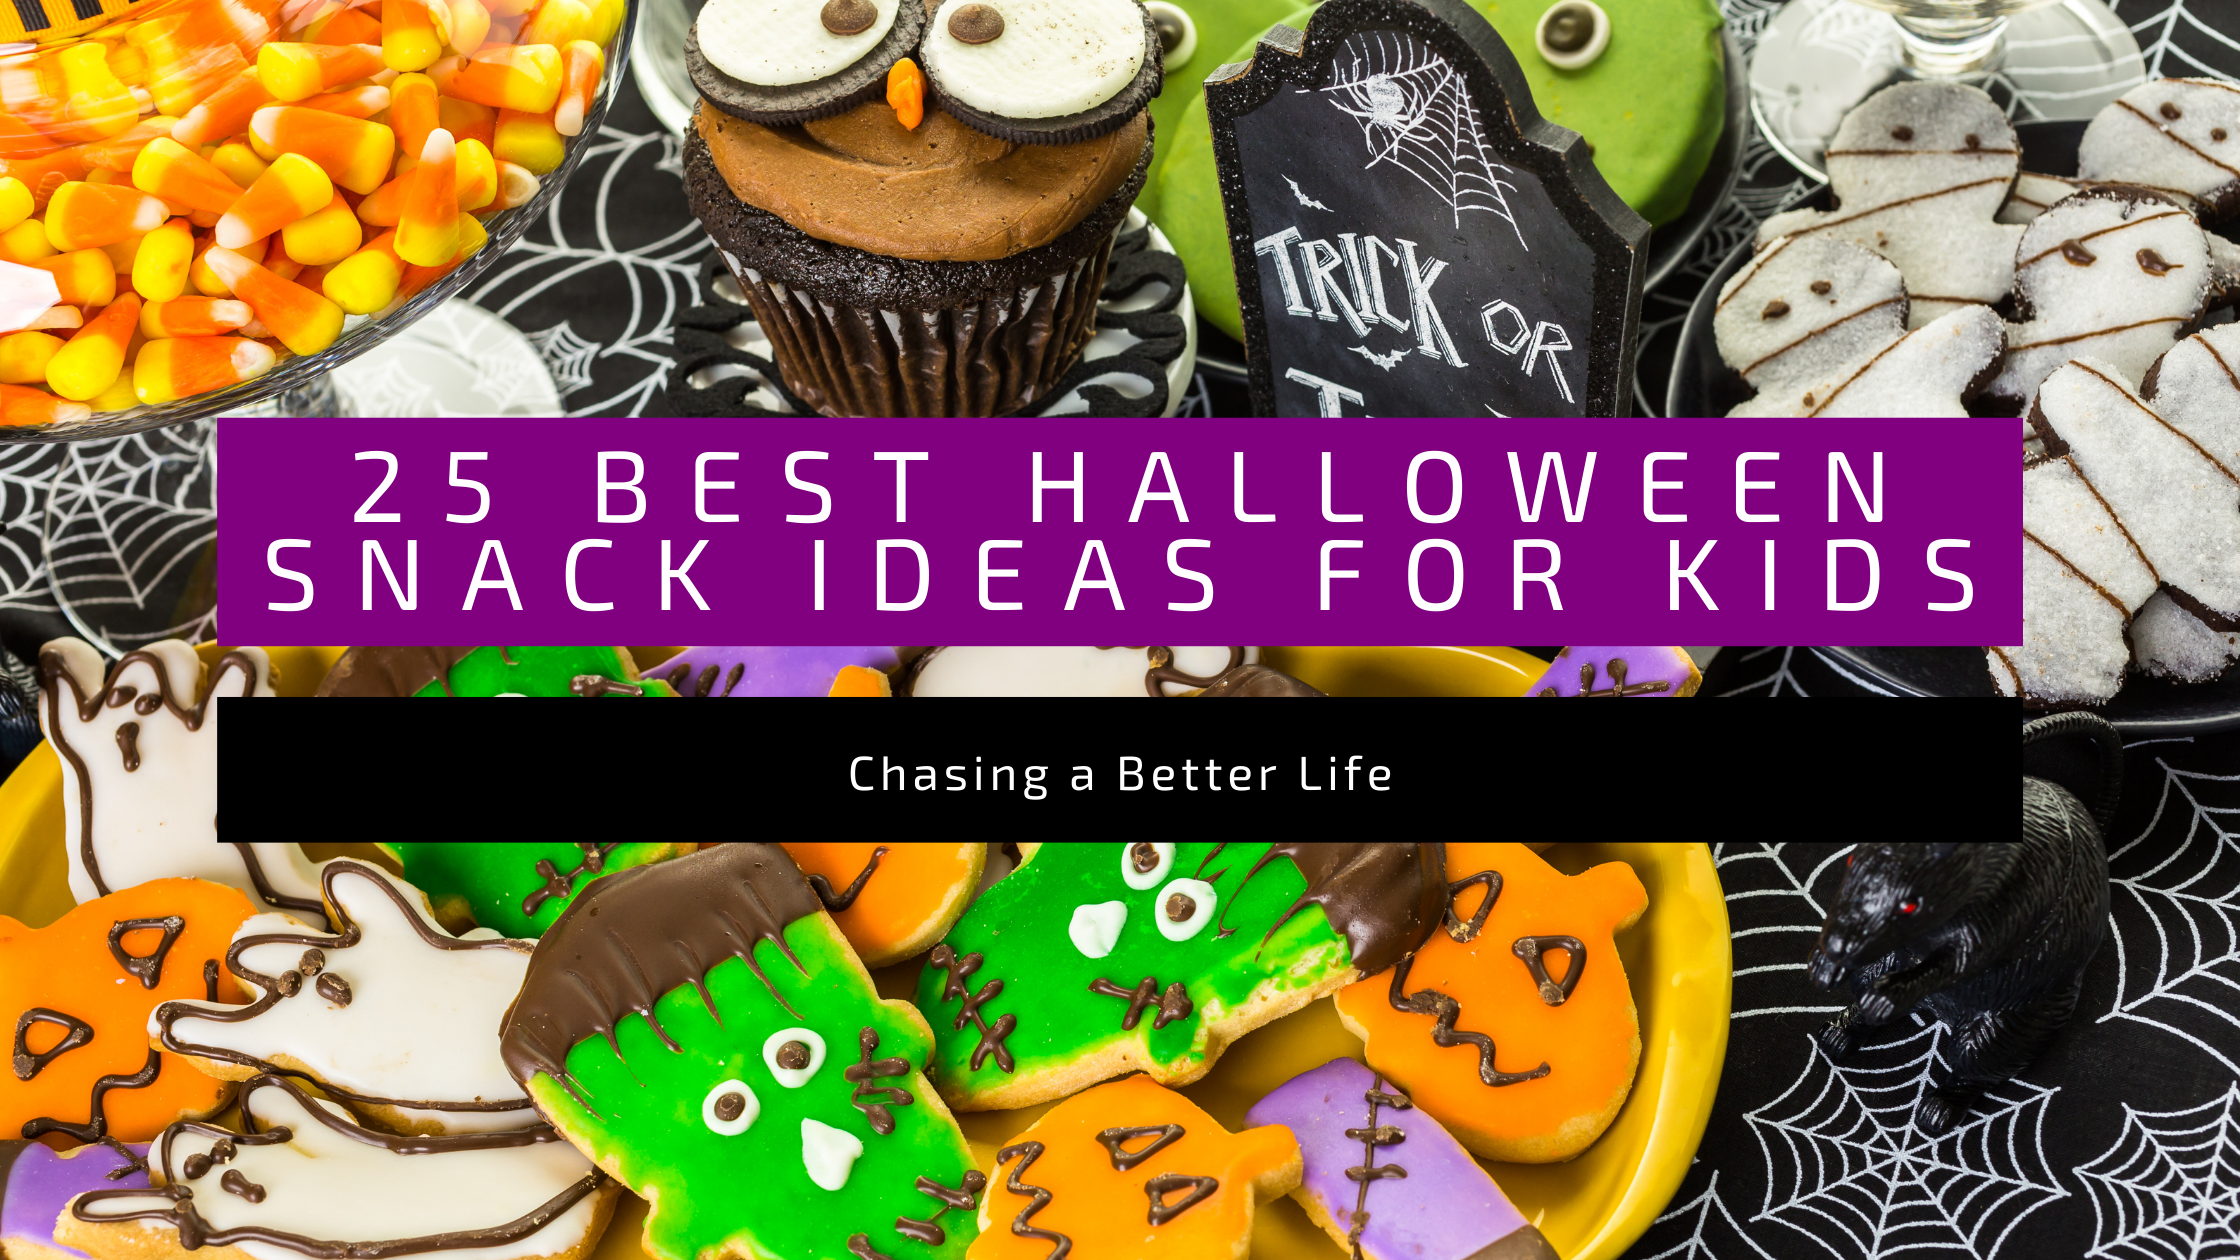 The 25 Best Halloween Snack Ideas for Kids 28